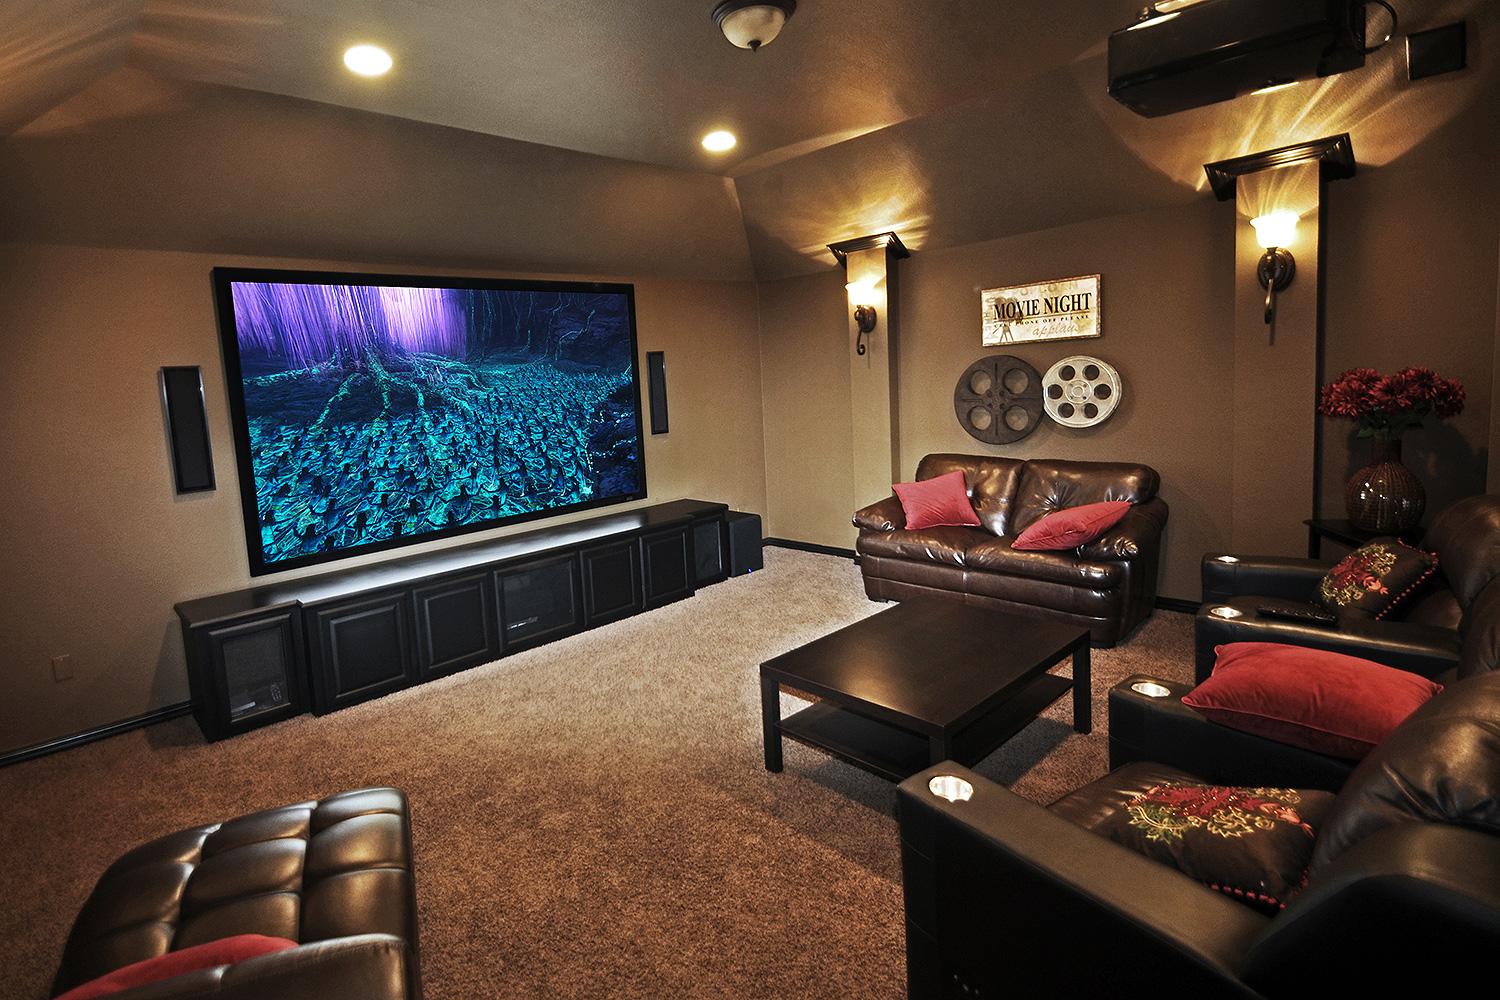 3 Of The Coolest Home Theatre Rooms You'll Ever See